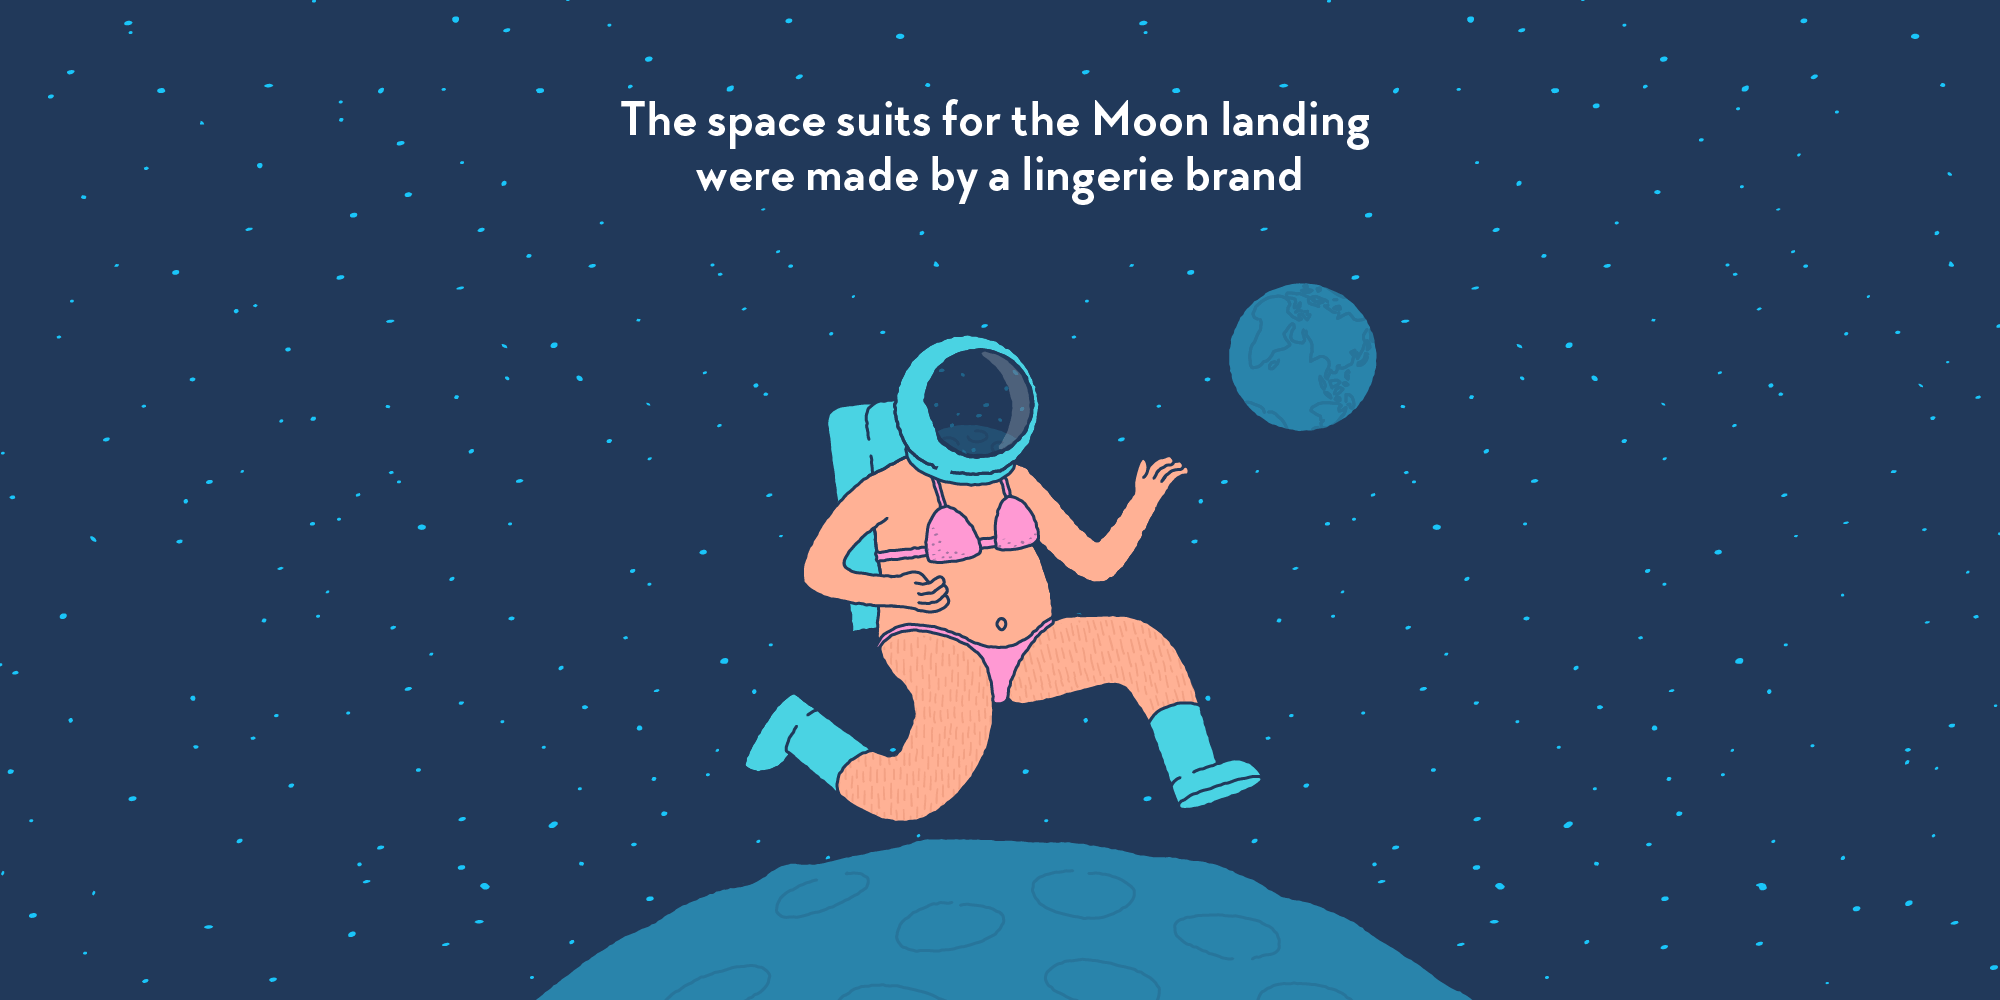 Neil Armstrong on the Moon, wearing only his helmet and fine lingerie.